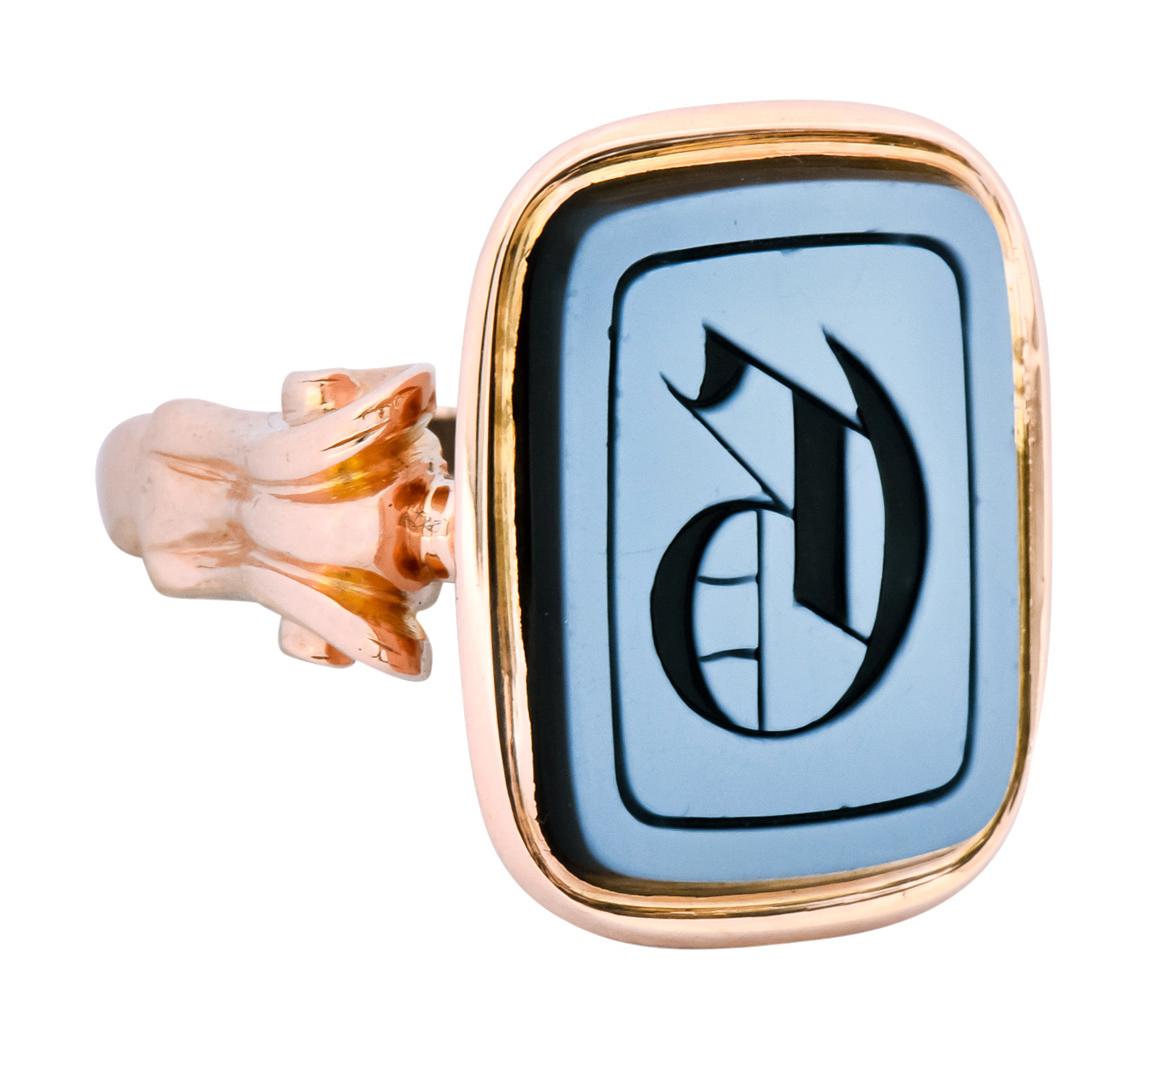 Centering a reverse carved intaglio displaying an uppercase 'G', measuring approximately 16.5 x 12.5 mm

With a white surface, black back, and the deeply engraved stylized black 'G'

Bezel set in a polished gold surround with milgrain detailing,